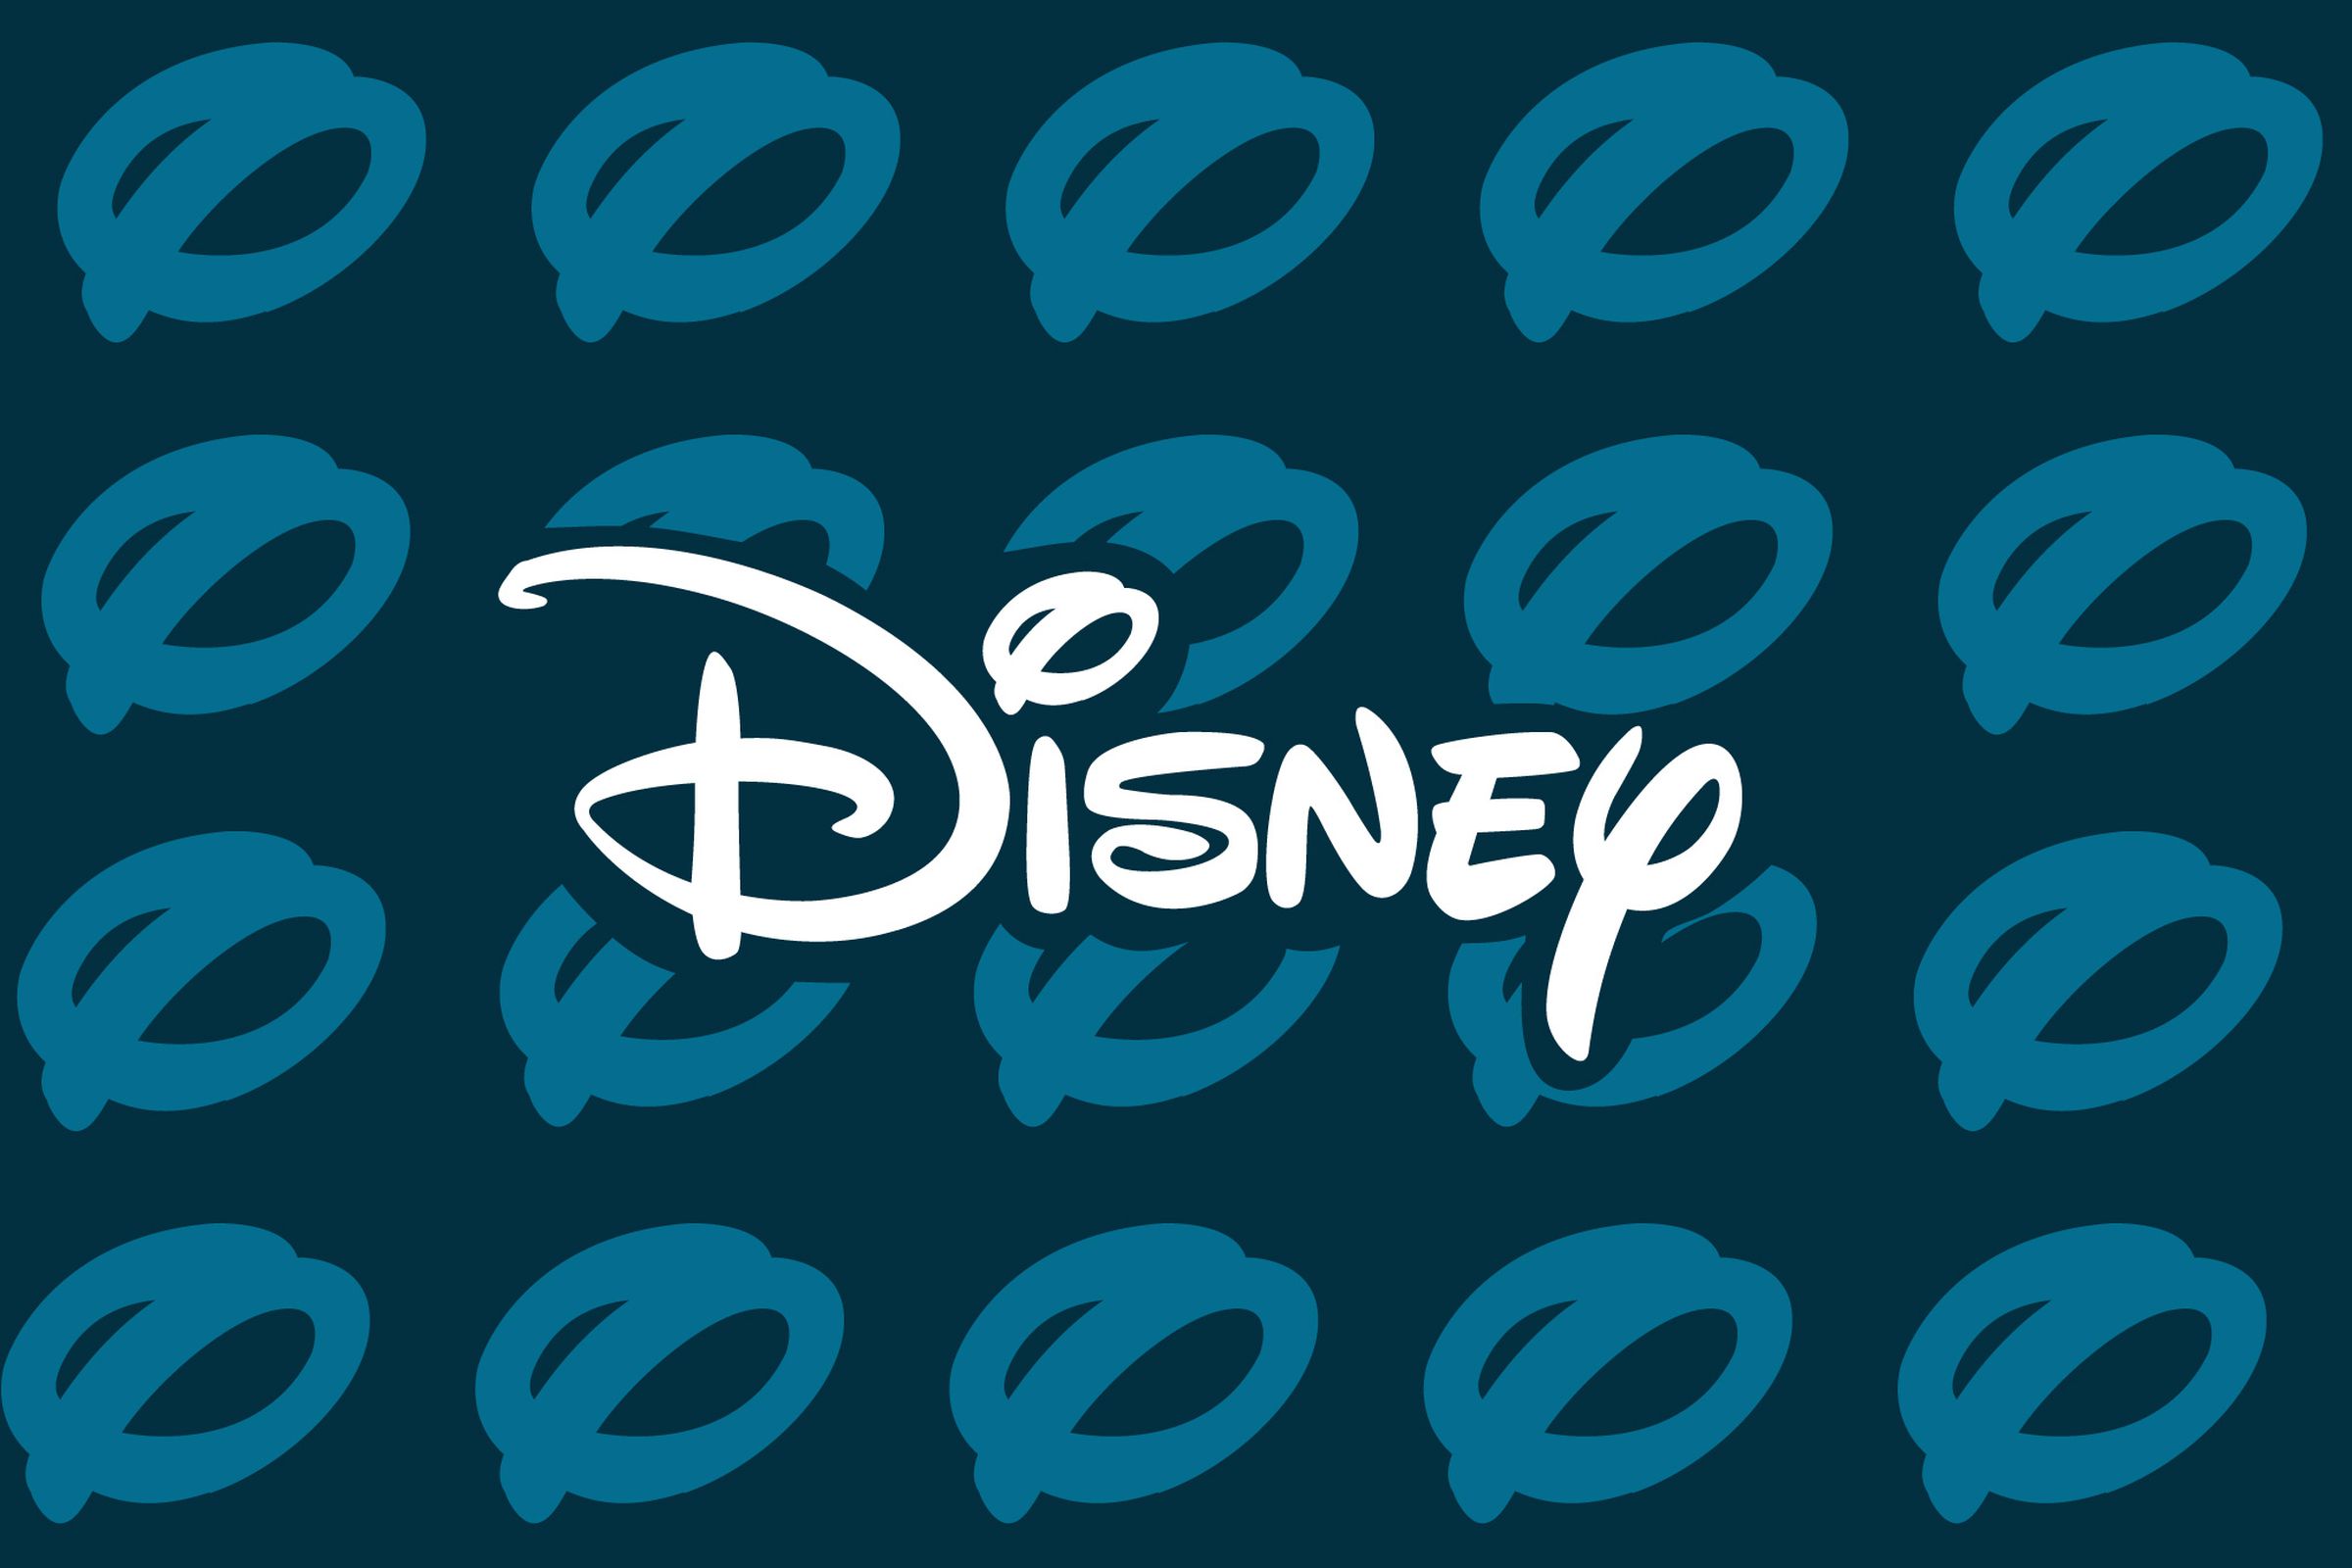 The Disney logo over a blue and black background with tiled circles in the style of Disney’s logo.